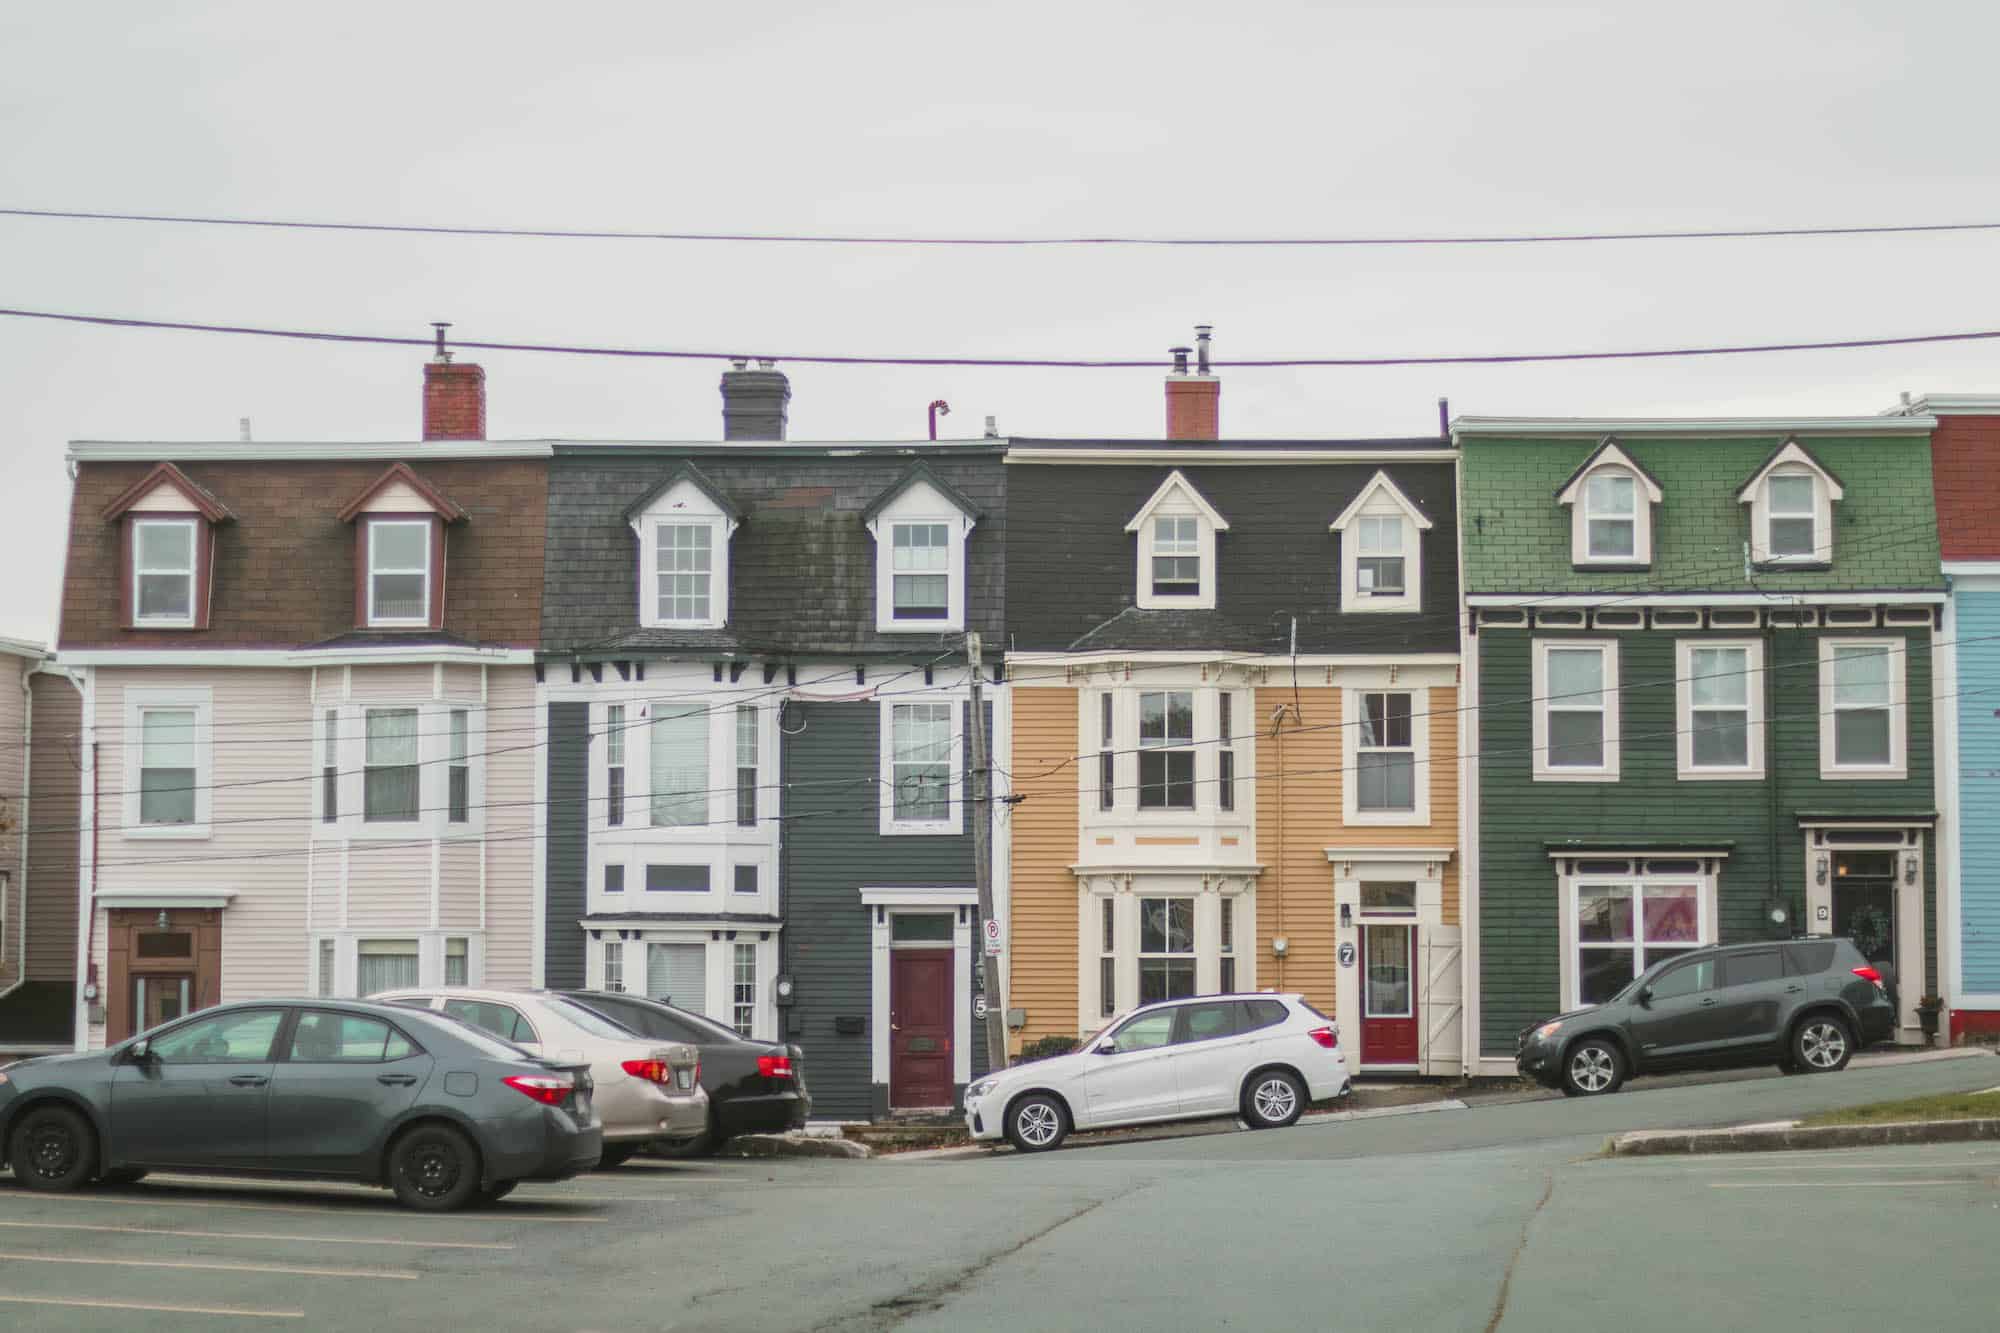 Colourful houses in St. John's, Newfoundland